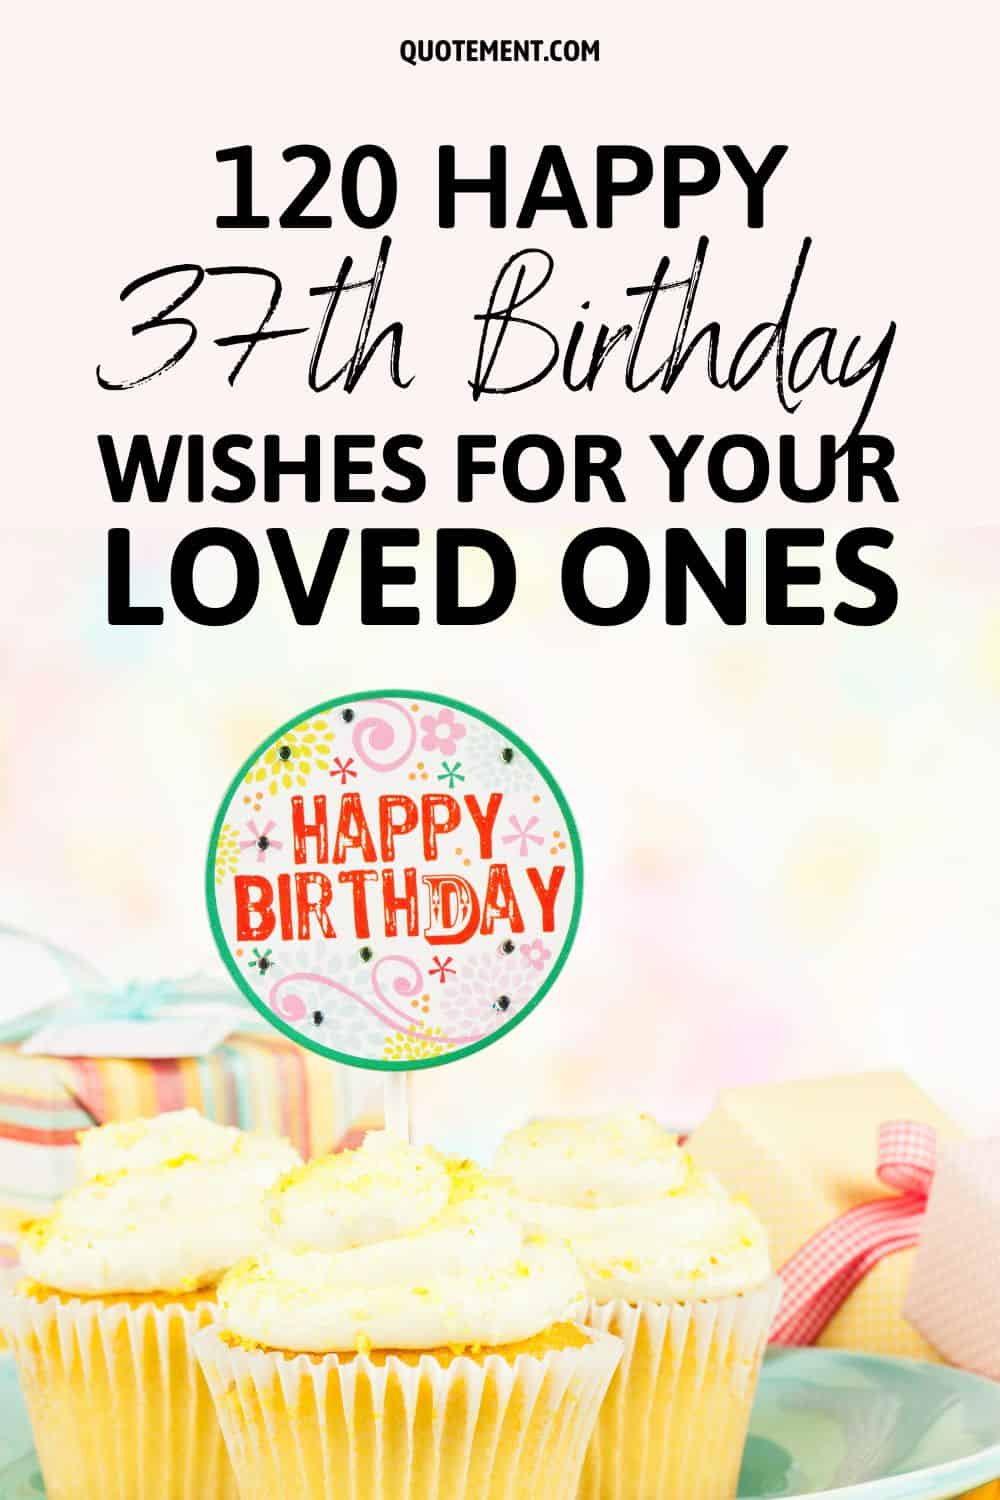 120 Happy 37th Birthday Wishes For Your Loved Ones
